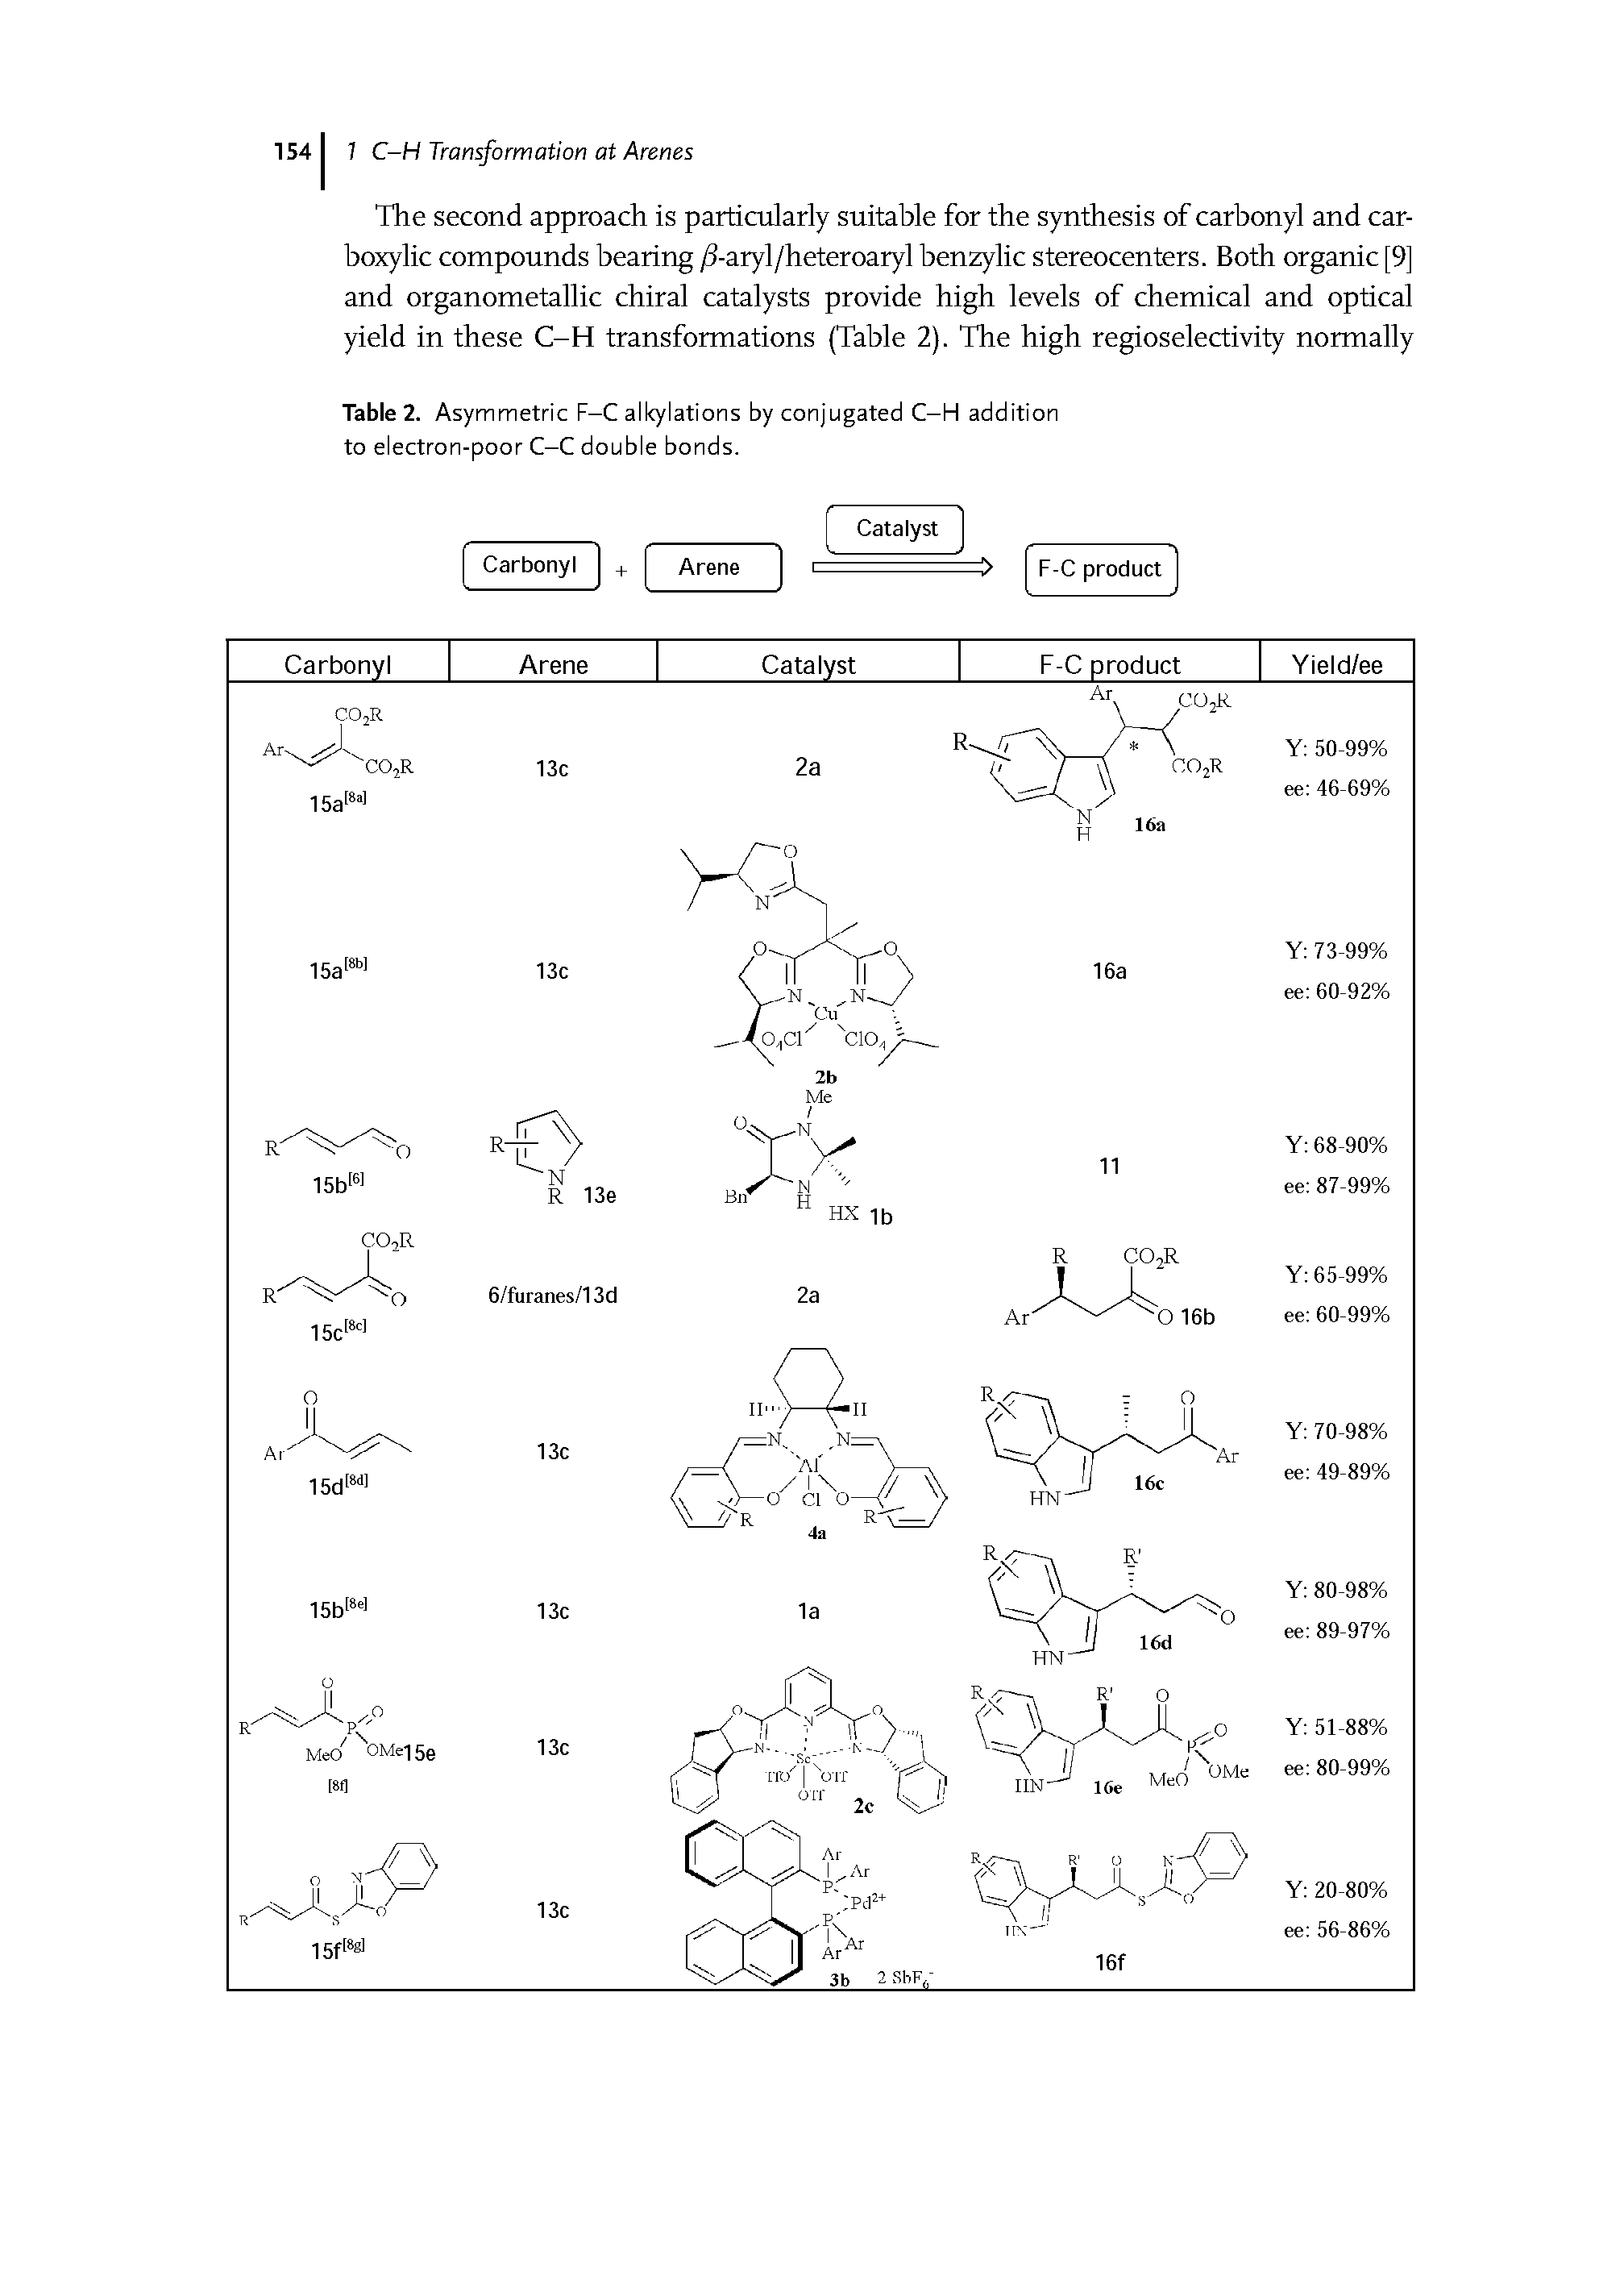 Table 2. Asymmetric F-C alkylations by conjugated C-H addition to electron-poor C-C double bonds.